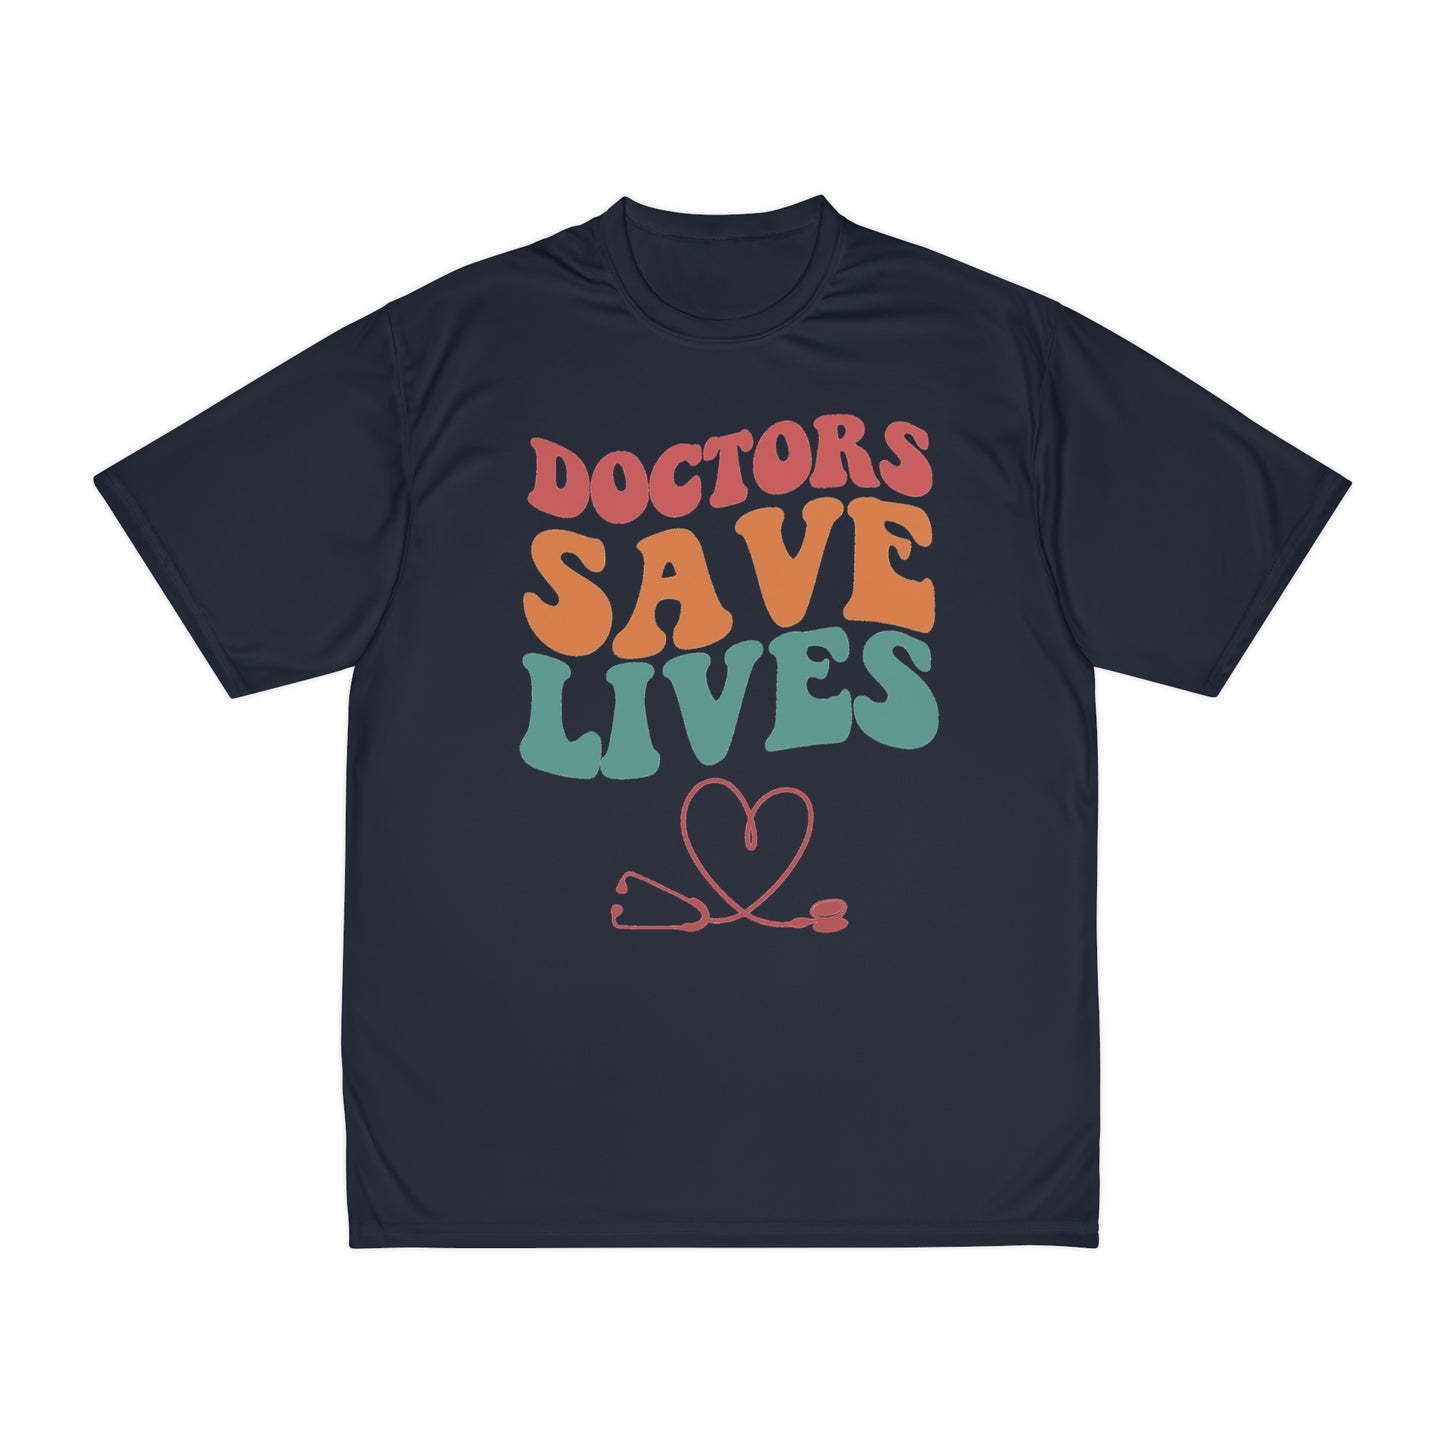 Doctors Save Lives Performance T-Shirt, Doctor shirts, Doctor gift ideas, New Doctor shirt, Future doctor shirt, gift for doctors